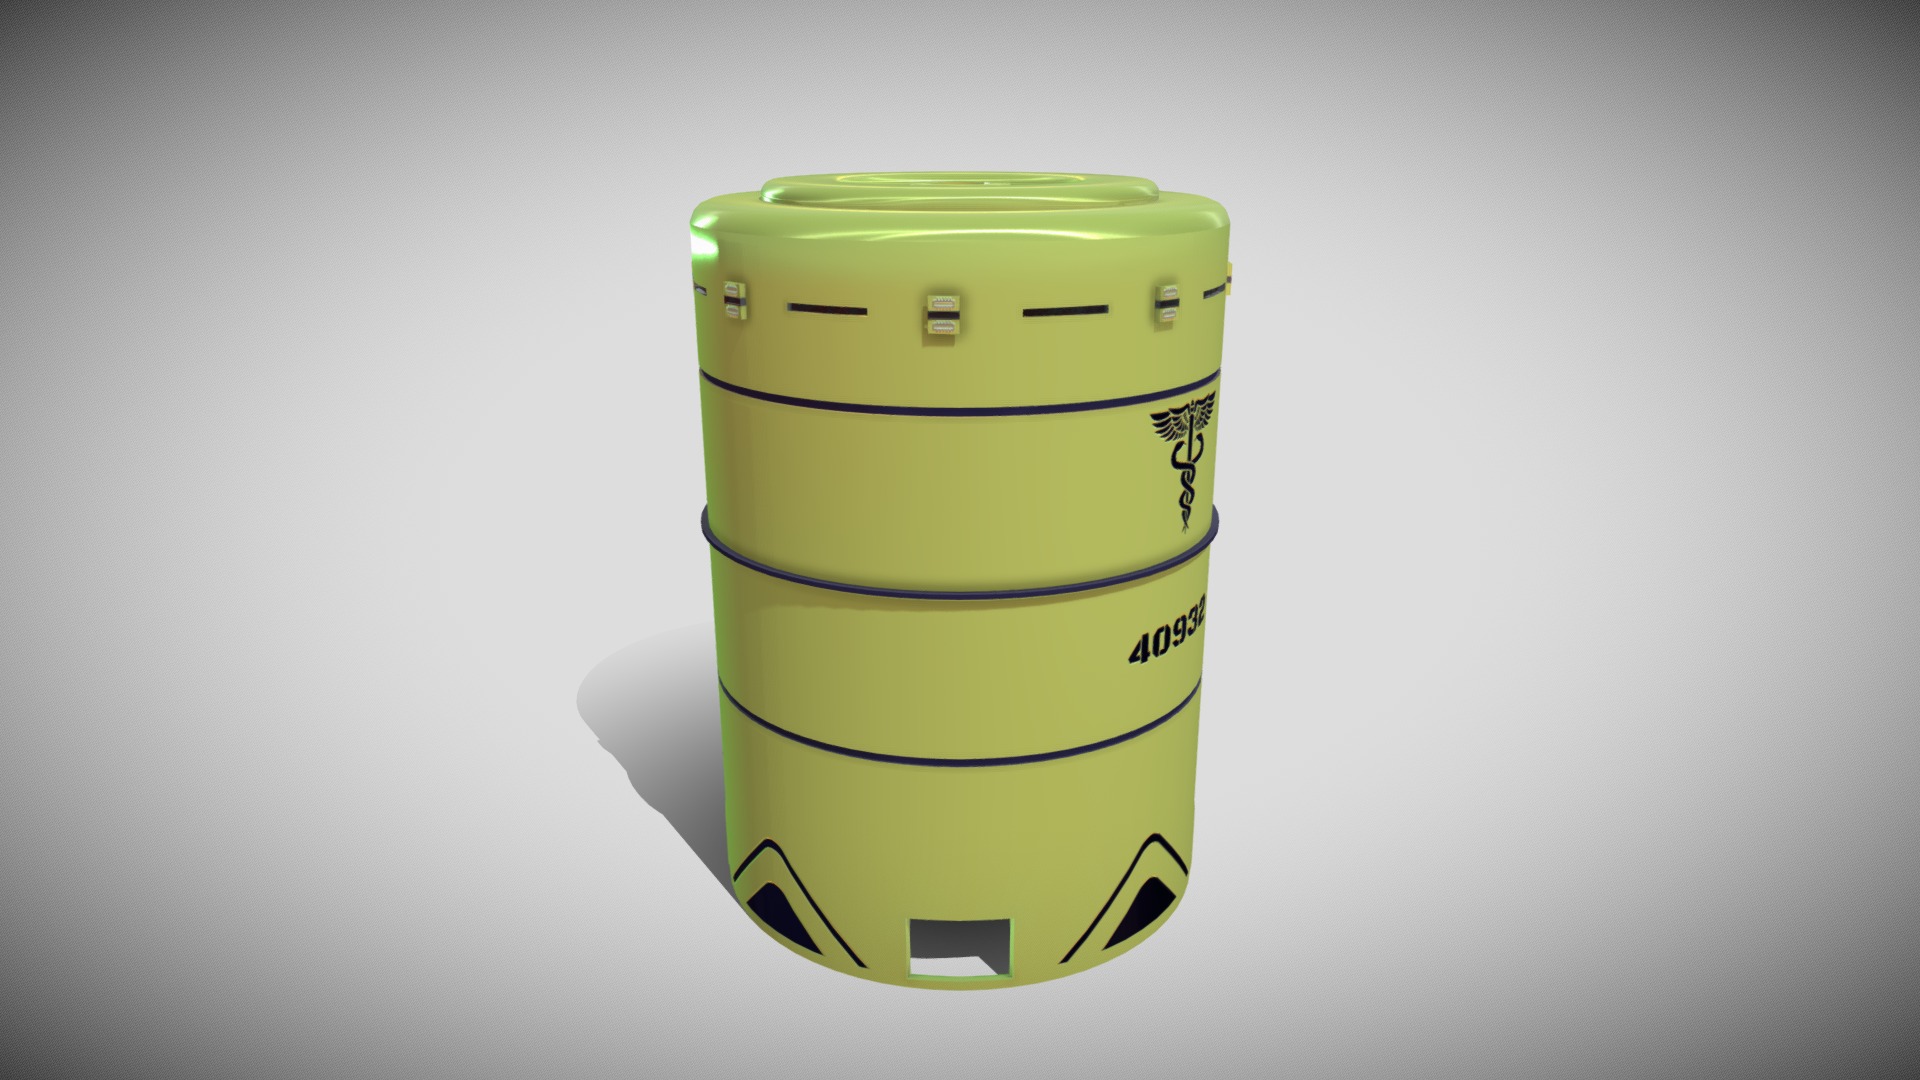 3D model Sci-fi Asset - This is a 3D model of the Sci-fi Asset. The 3D model is about a yellow and green container.